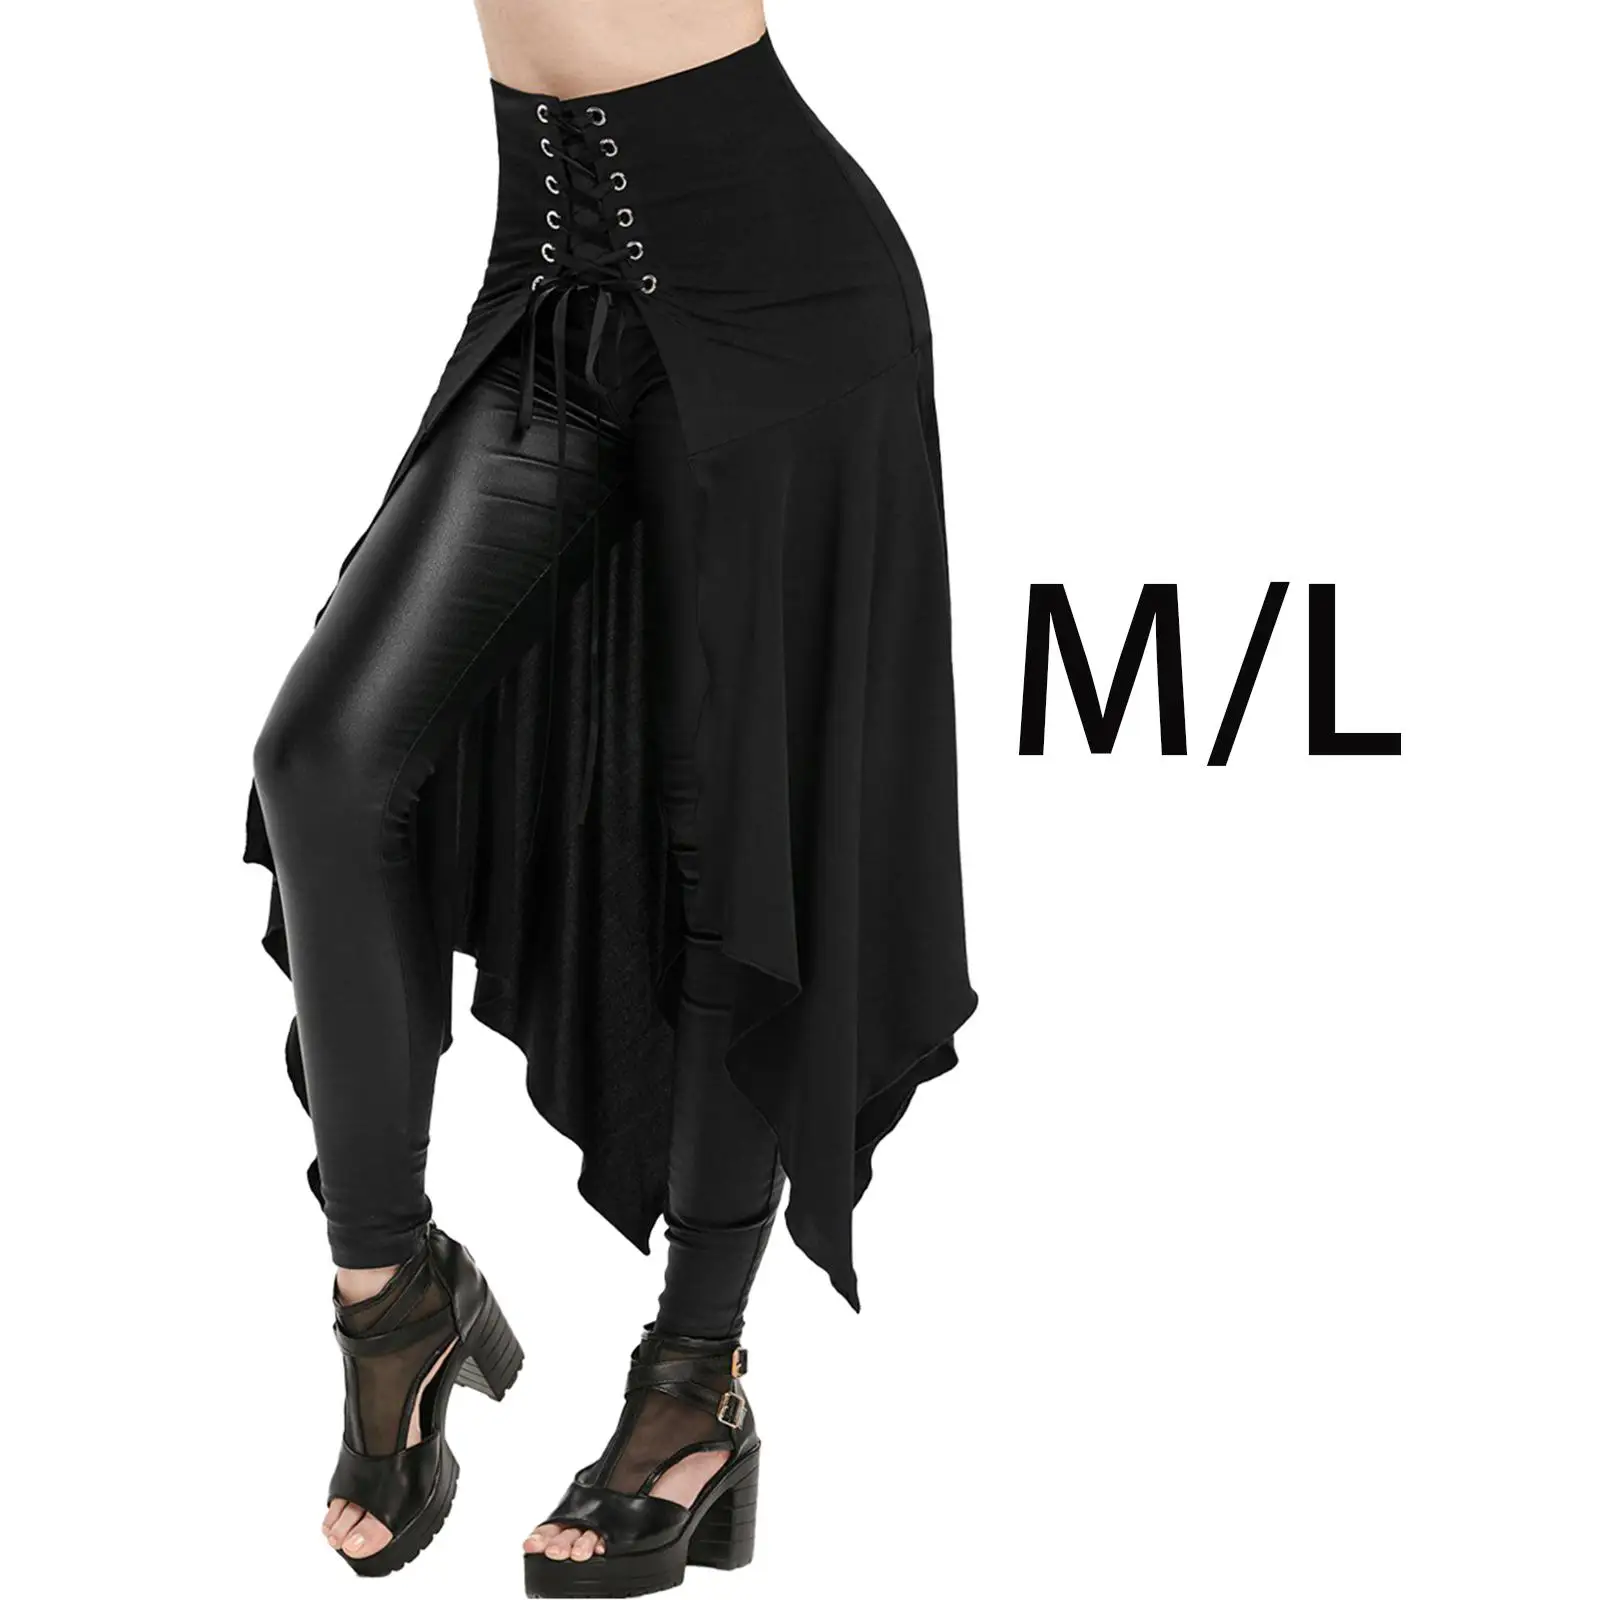 Womens Midi Skirt High Waist Steampunk Halloween Costume Accessory Lace up Flowy Long Skirt for Carnival Holiday Masquerade